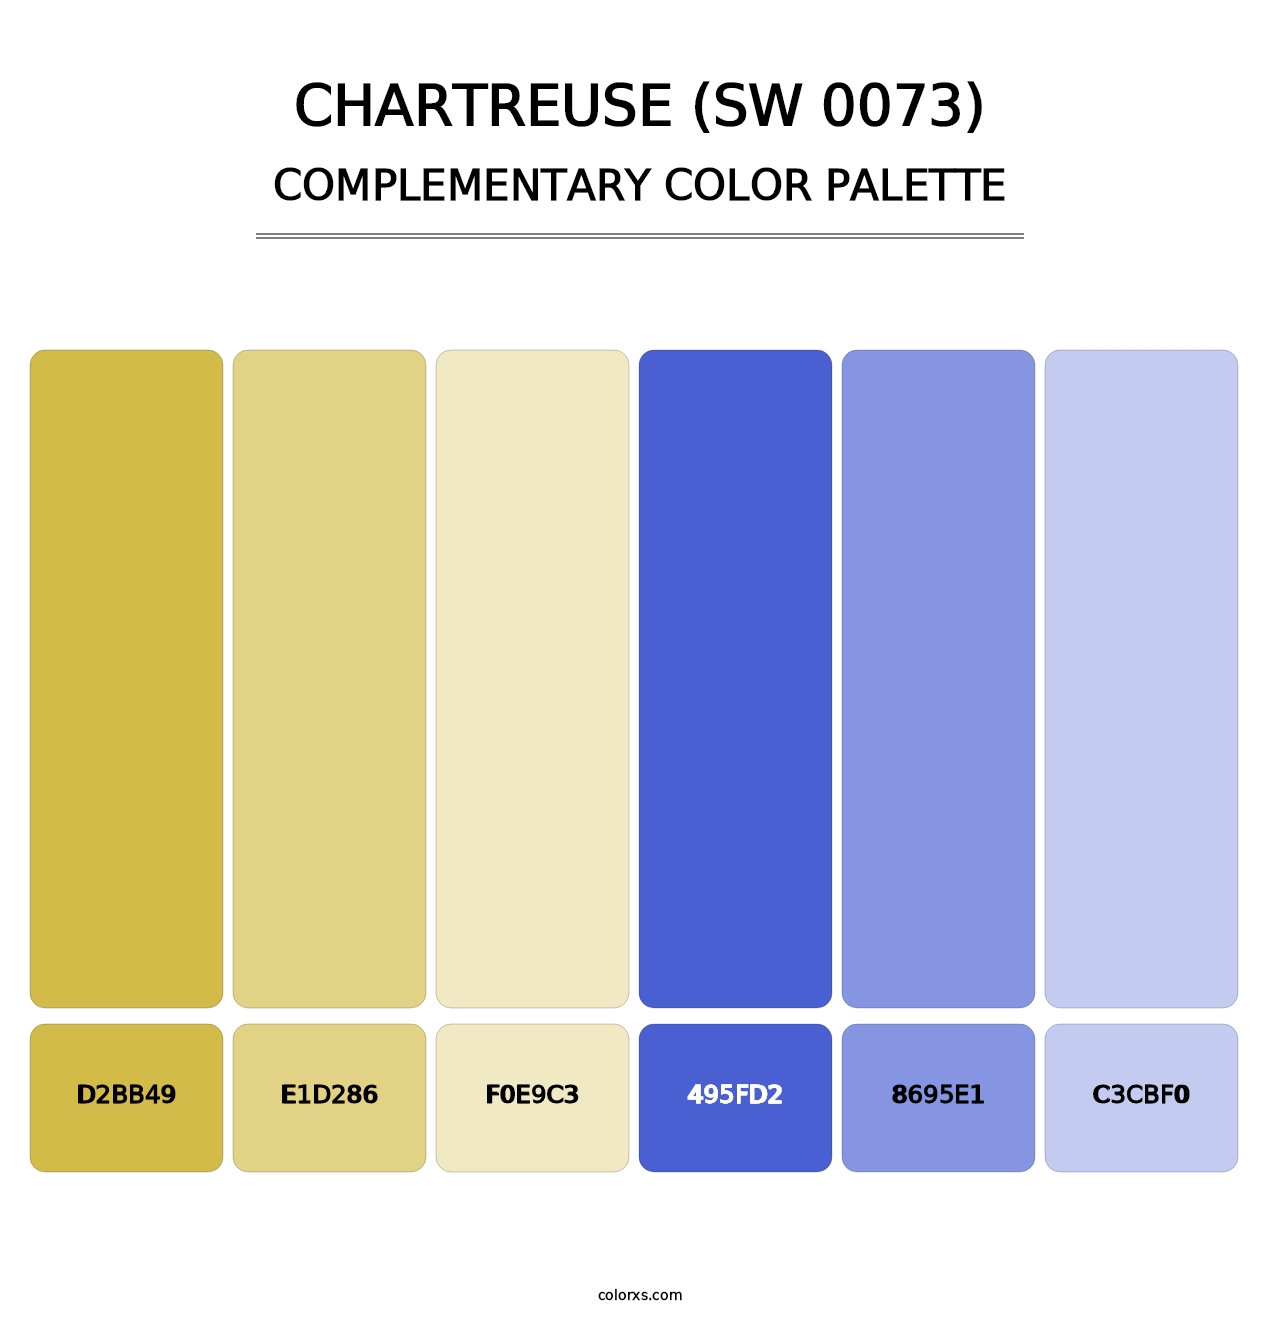 Chartreuse (SW 0073) - Complementary Color Palette